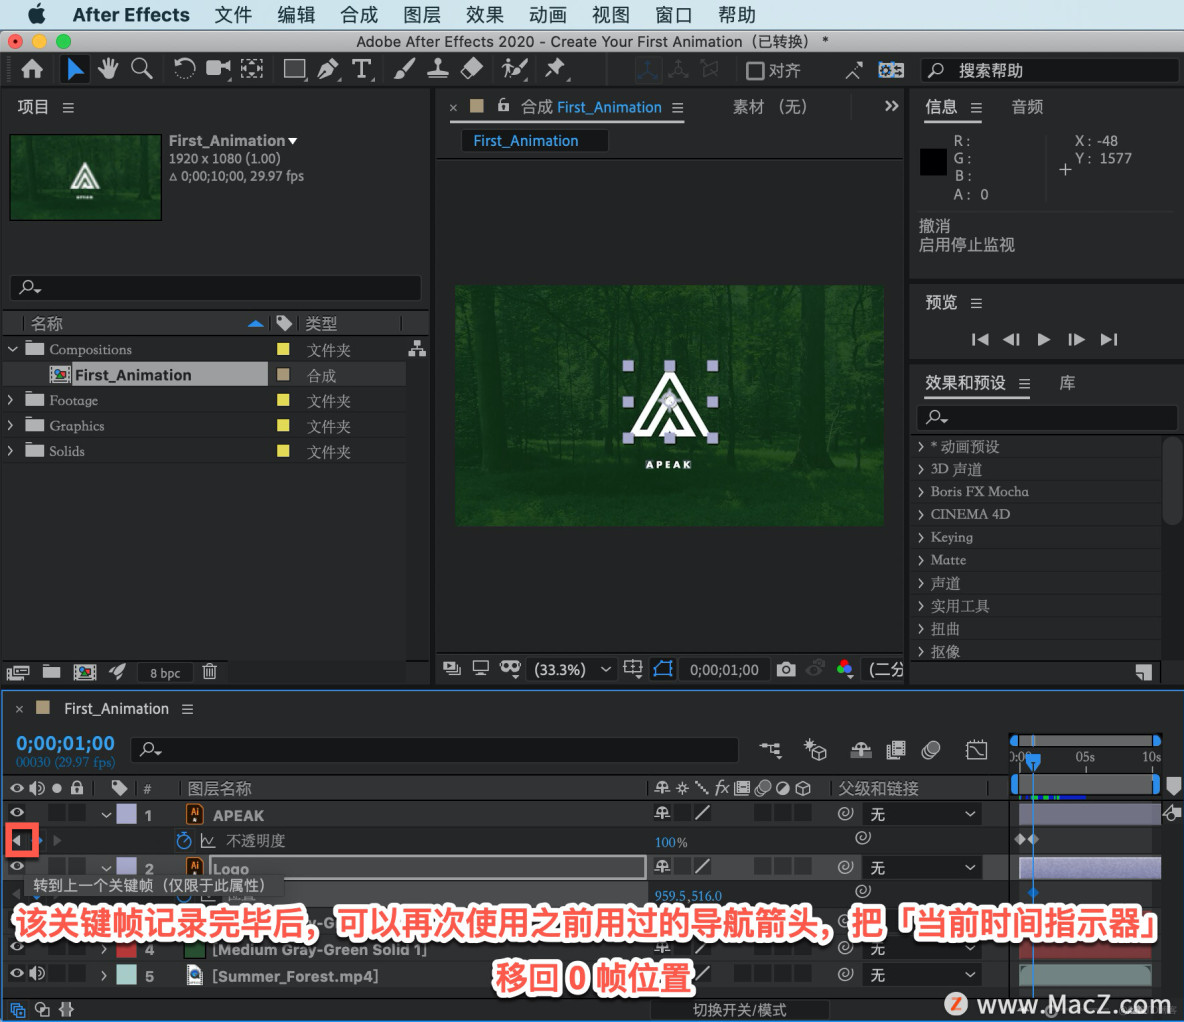 After Effects 教程，如何在 After Effects 中创建动画？_After Effects_04